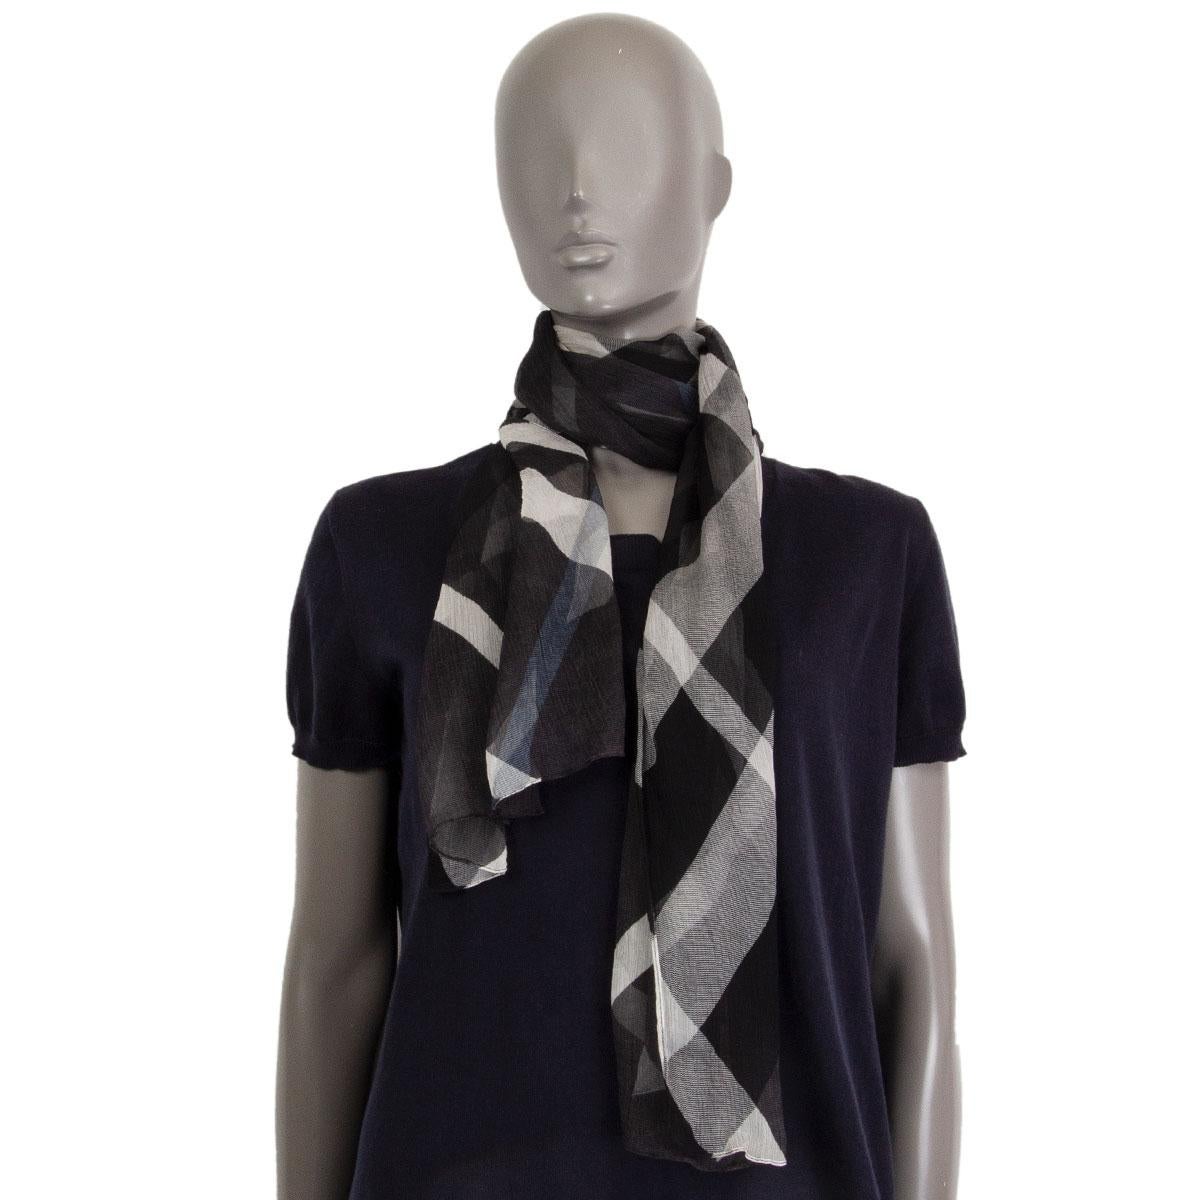 100% authentic Burberry check scarf in black, white and light blue sheer silk (missing content tag). Has been worn and is in excellent condition.

Height 45cm (17.6in)
Length 186cm (72.5in)

All our listings include only the listed item unless